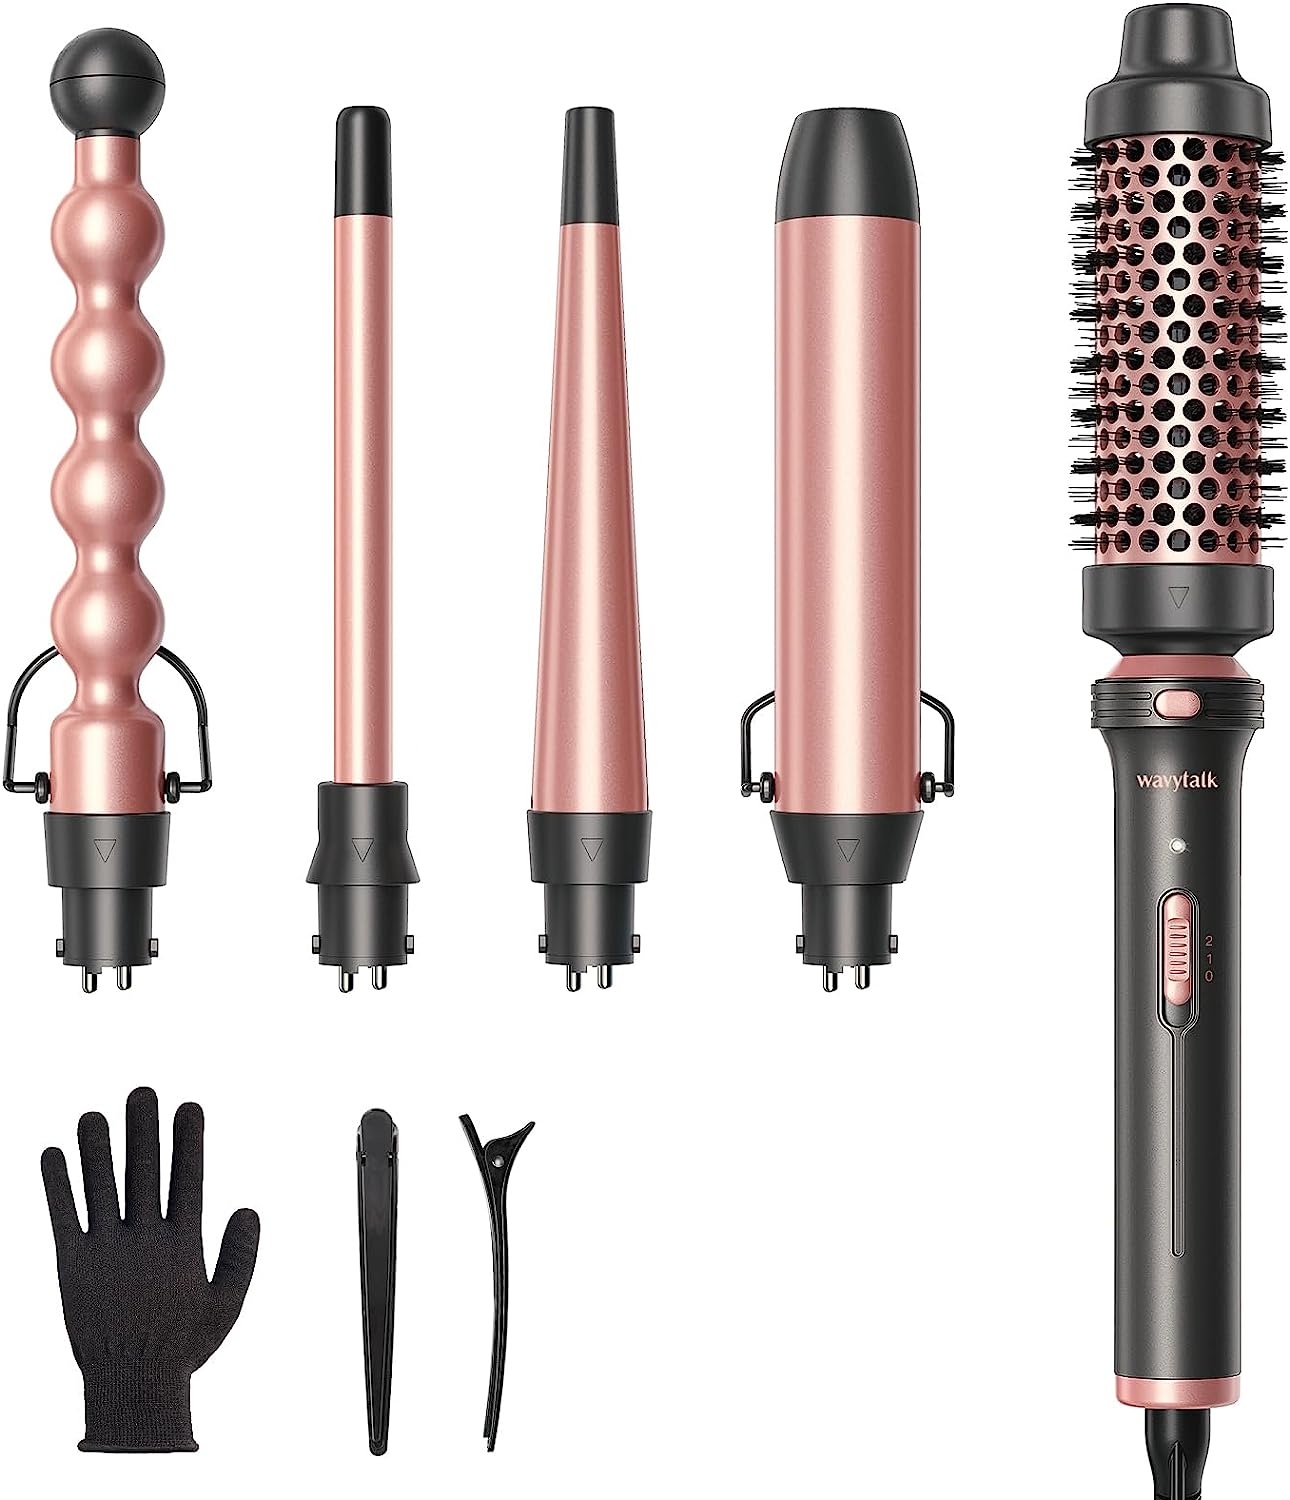 Wavytalk 5 in 1 Curling Iron,Curling Wand Set with [...]